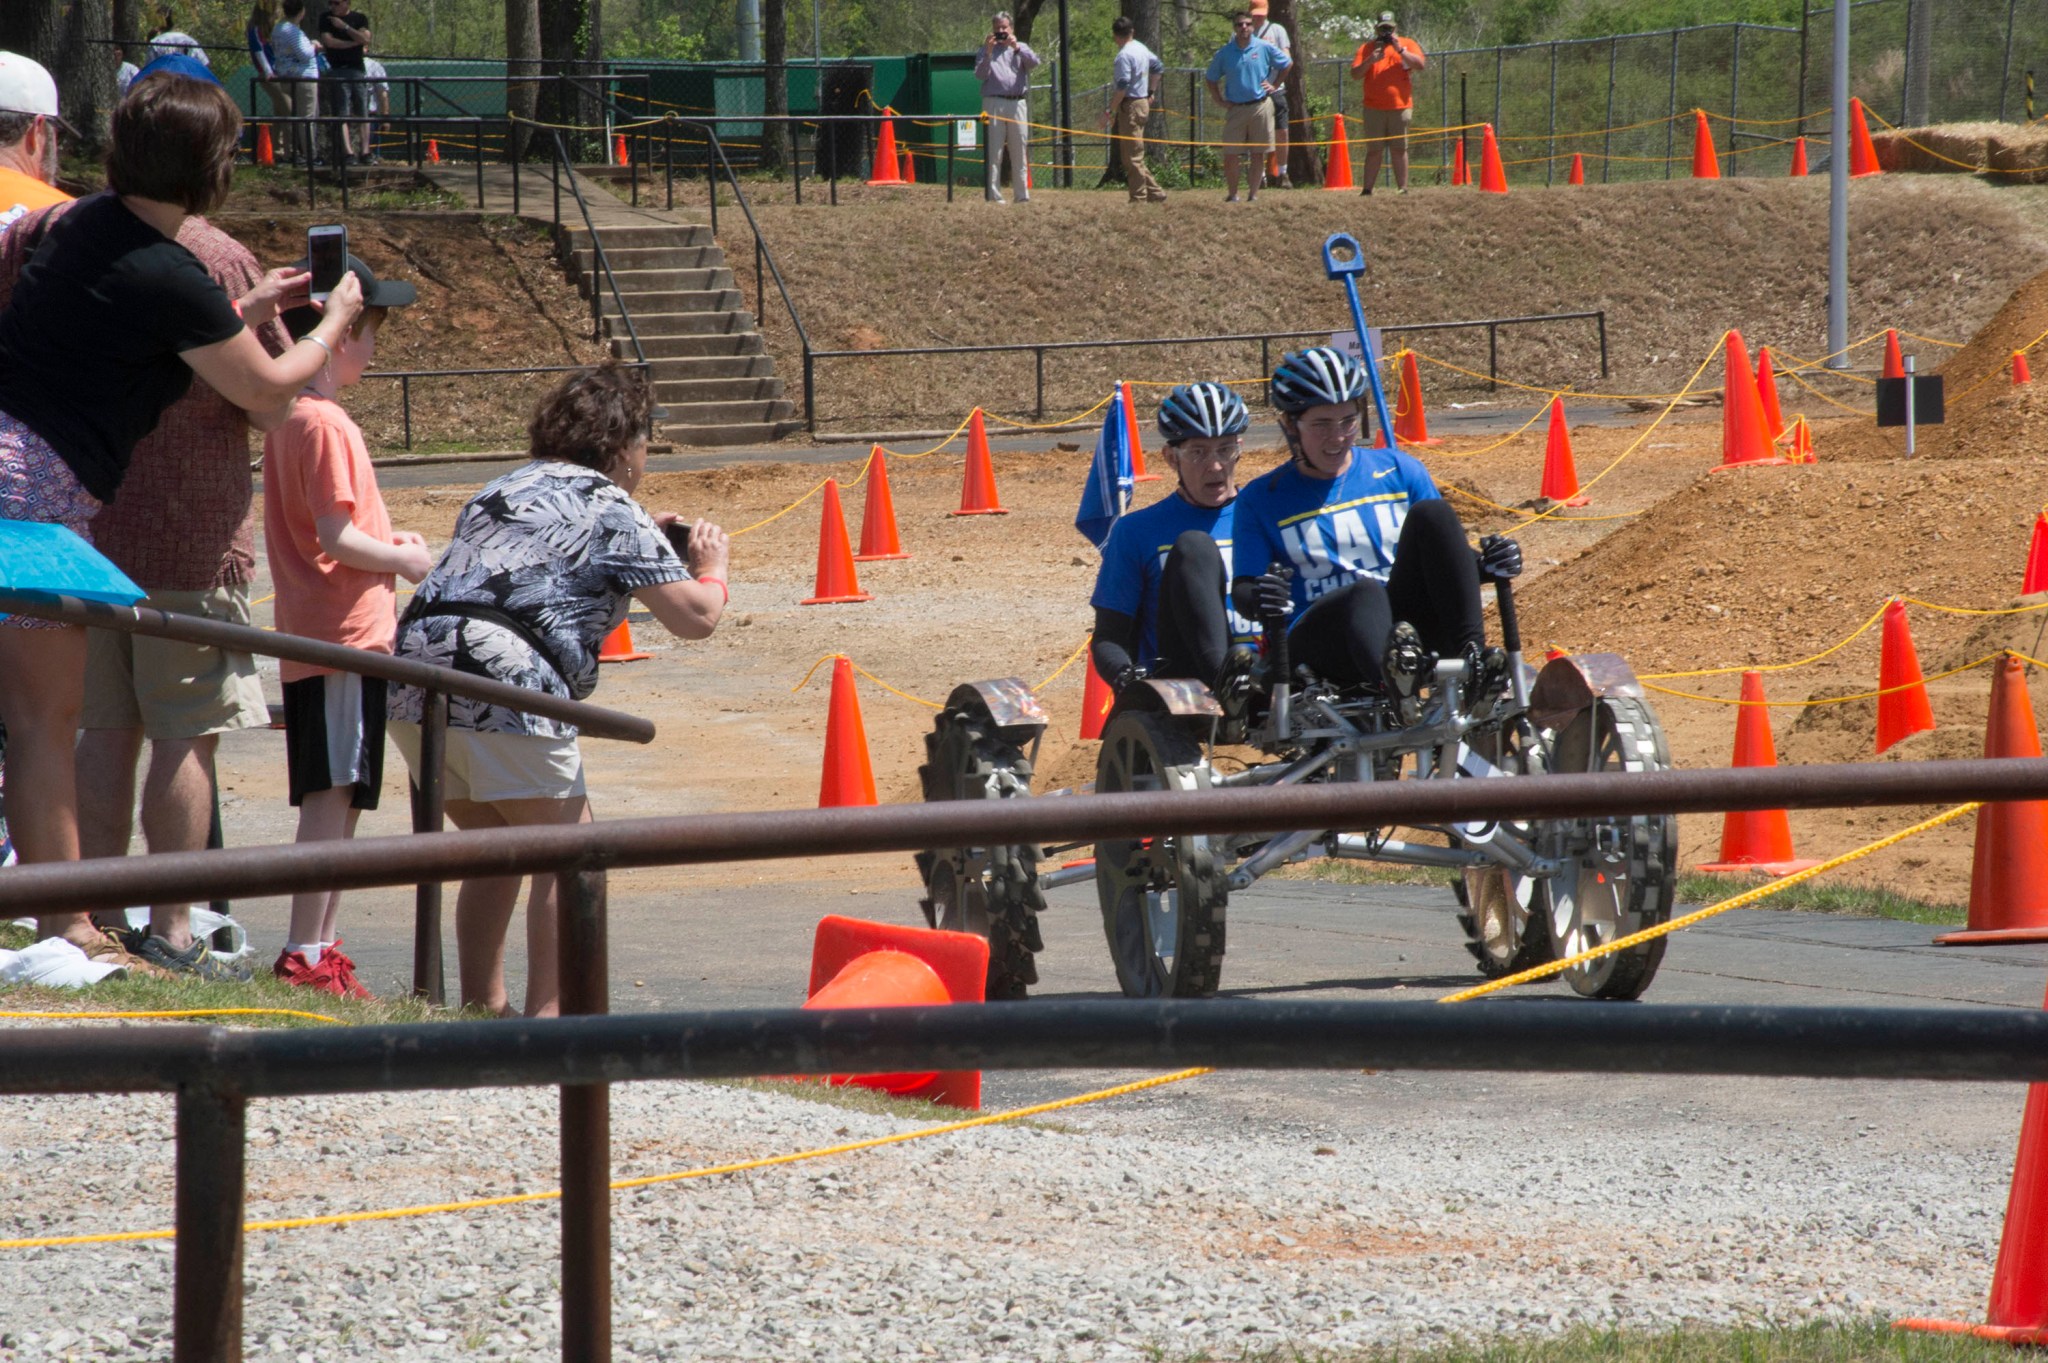 University of Alabama in Huntsville - Team 1 won the college/university division of the 2018 Human Exploration Rover Challenge.